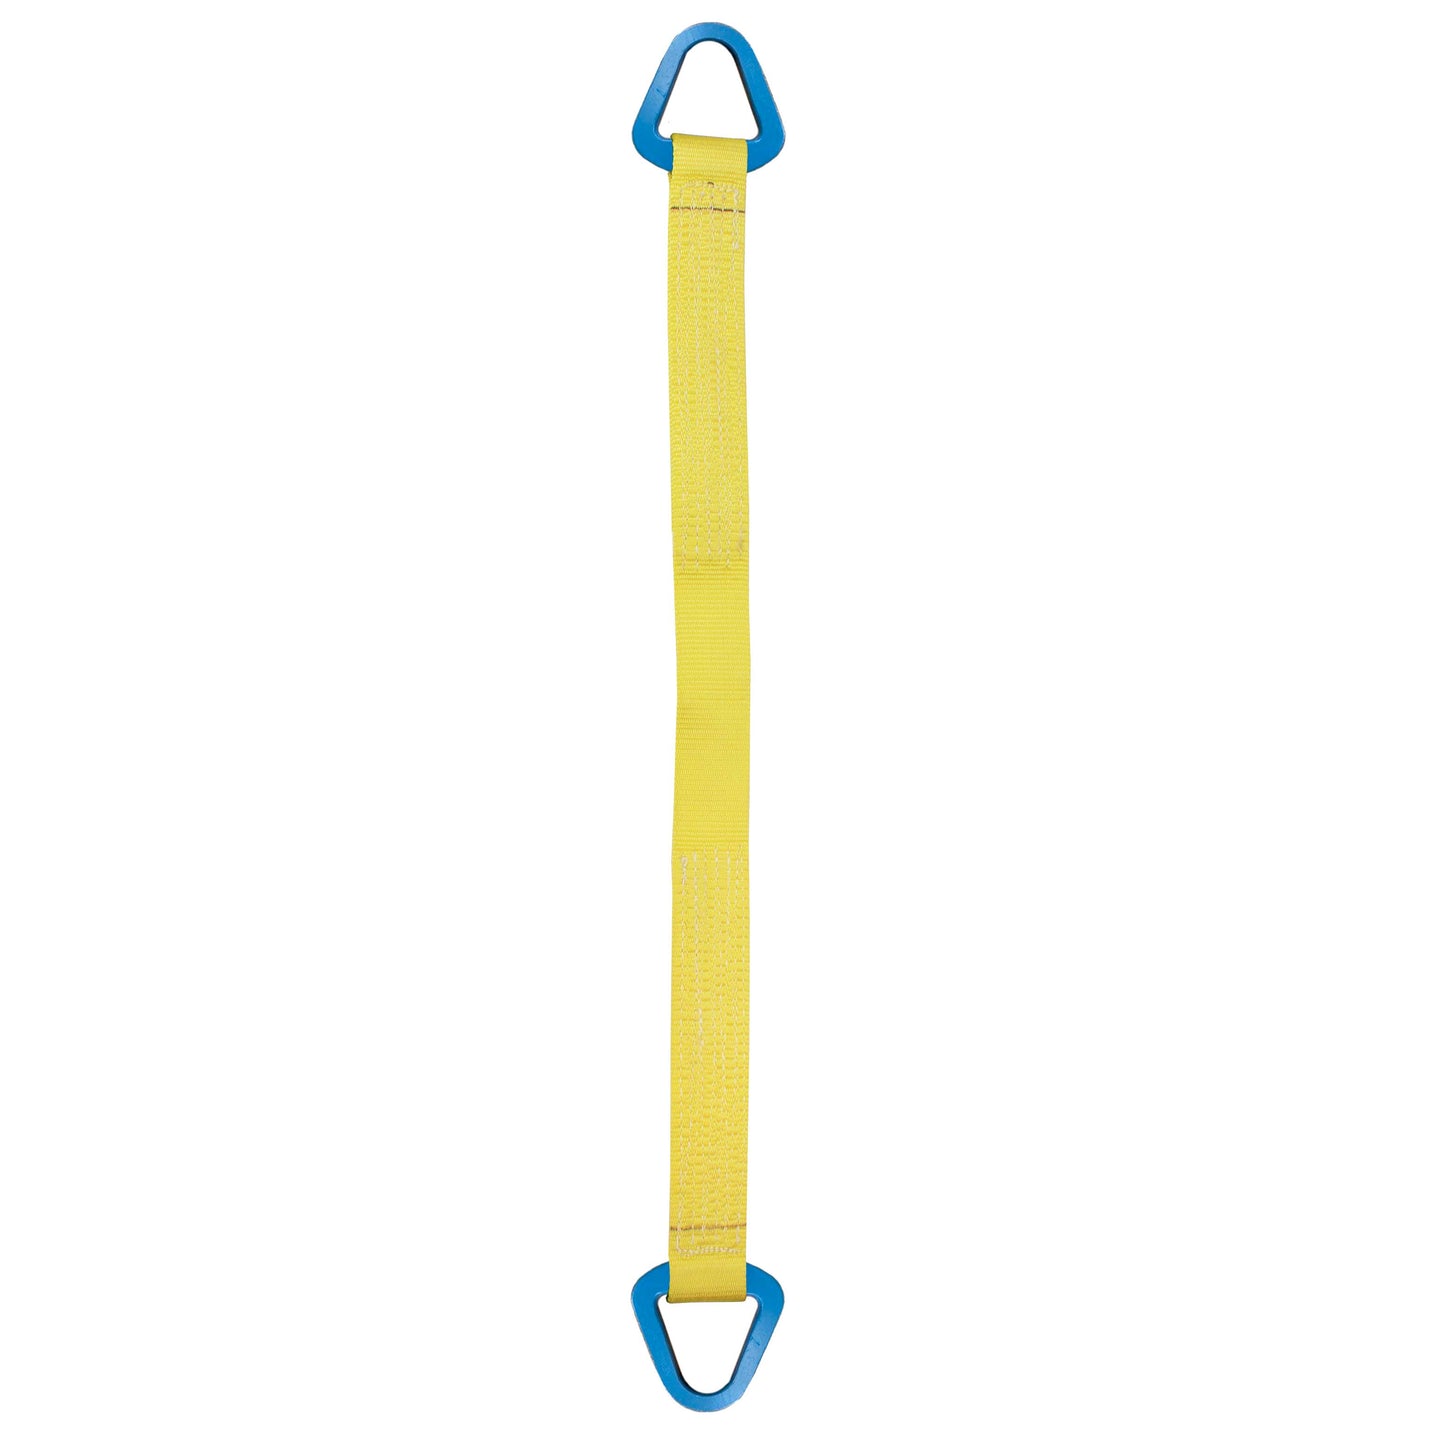 Nylon Lifting Sling Triangle 8 inch x 4 foot 1ply image 1 of 2